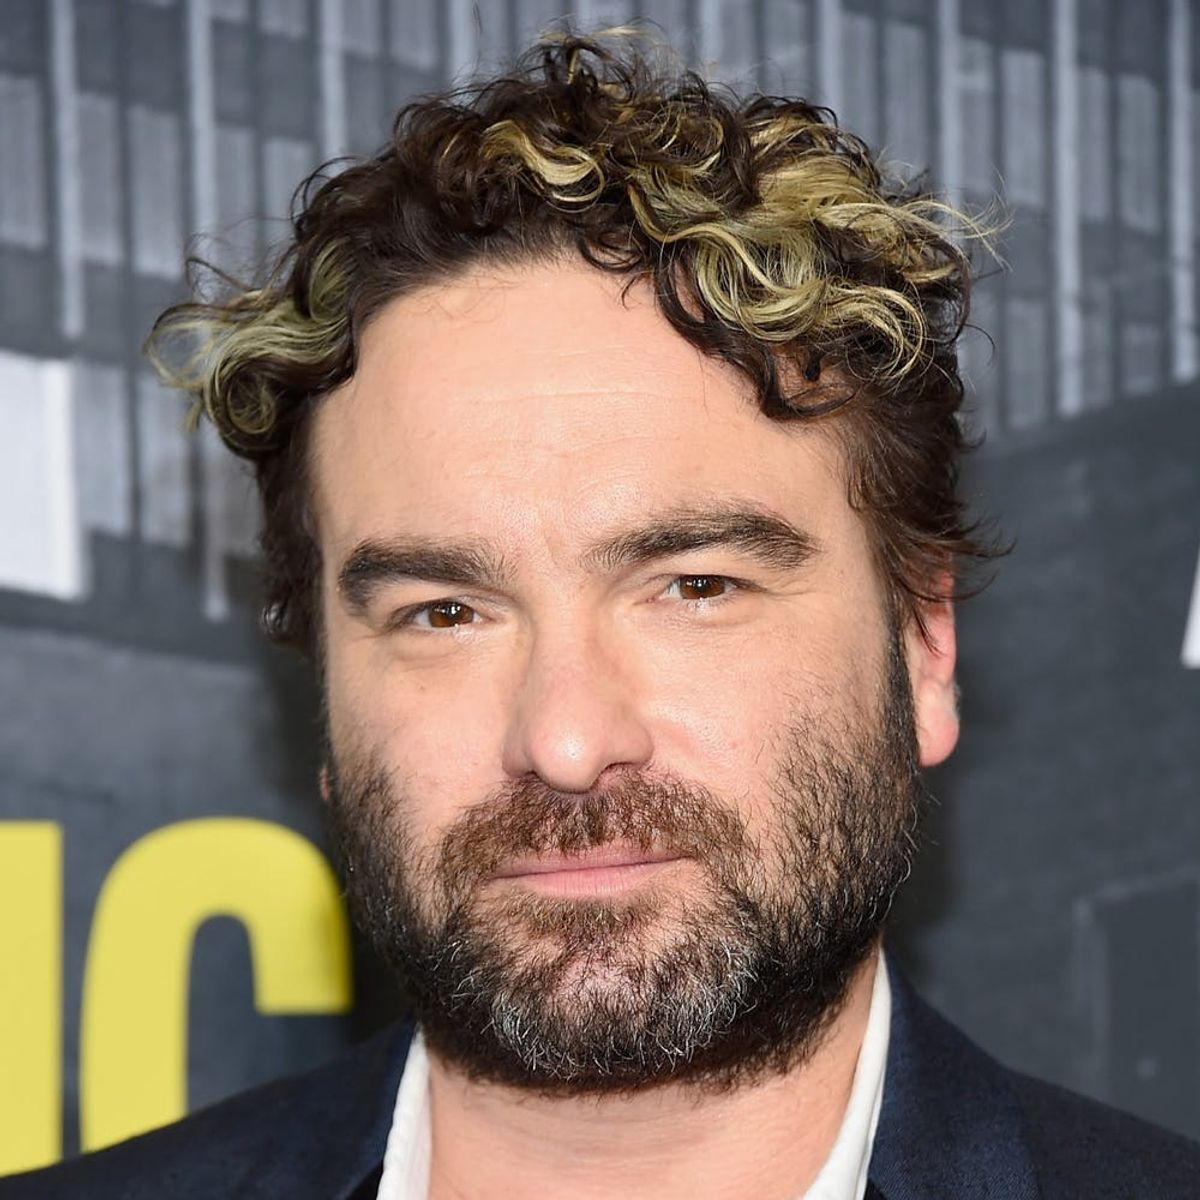 Johnny Galecki Hints That the End of ‘The Big Bang Theory’ Could Be on the Horizon